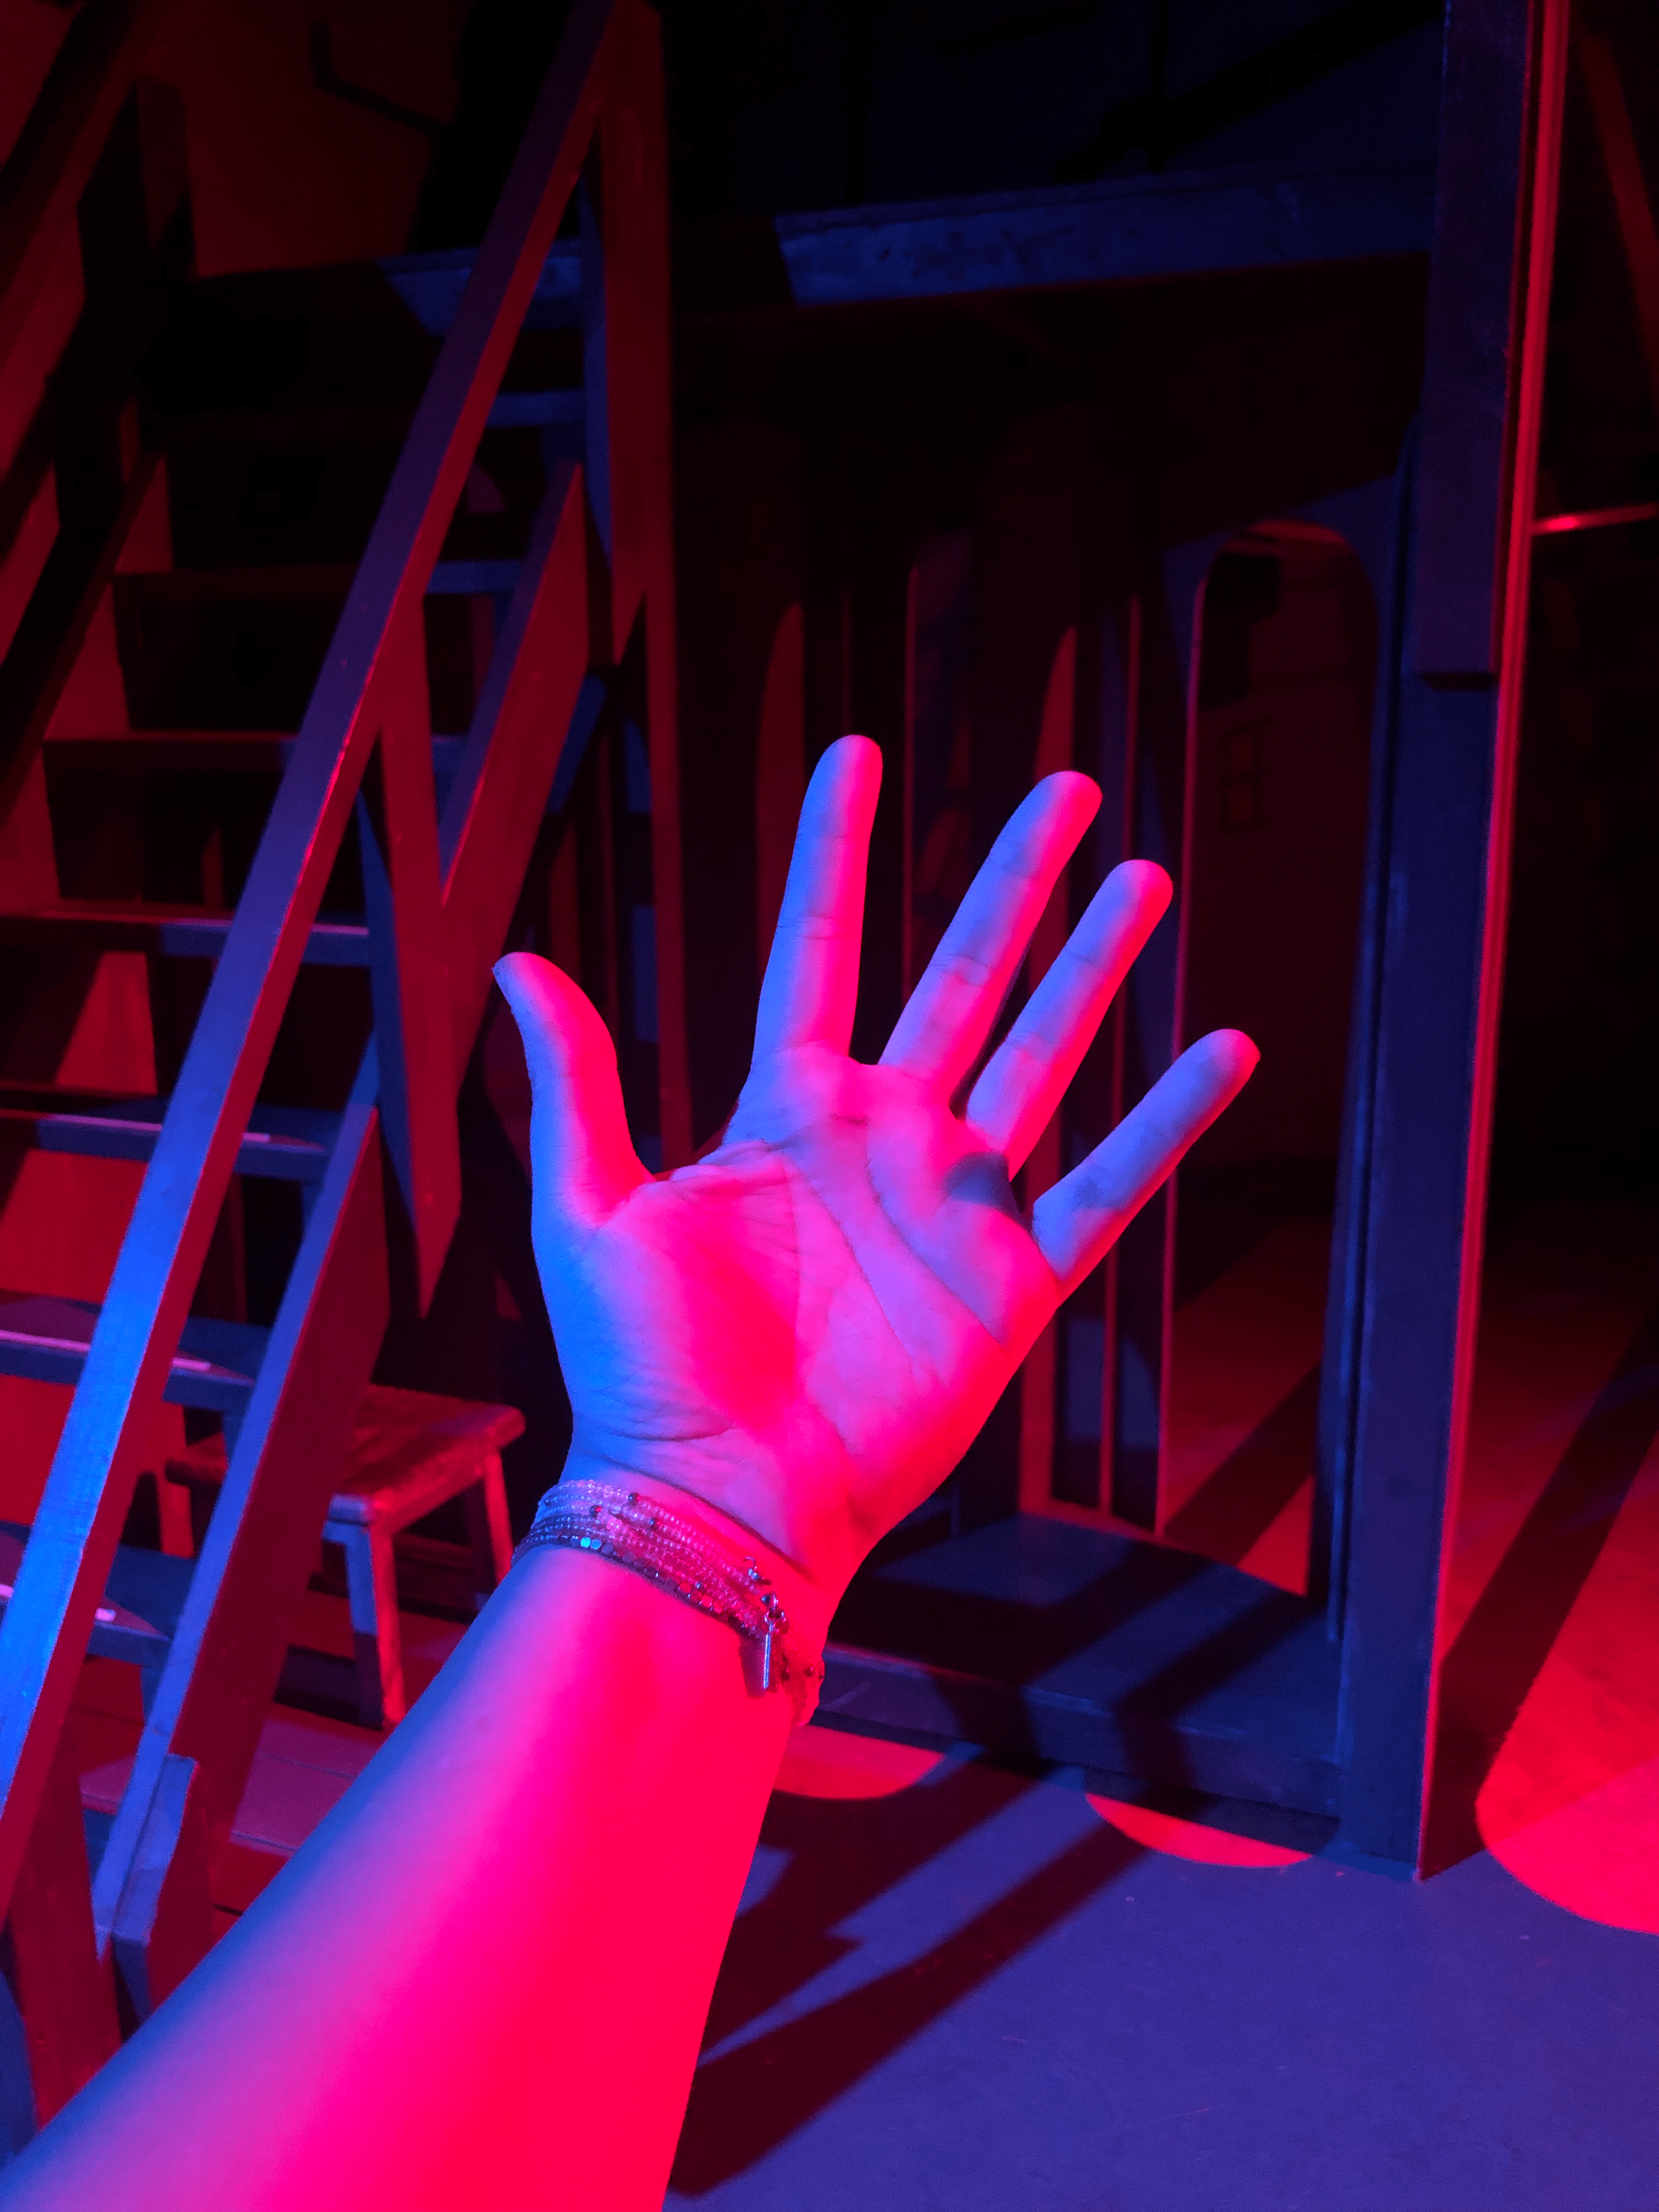 Example of lighting design accomplished on an outstretched hand